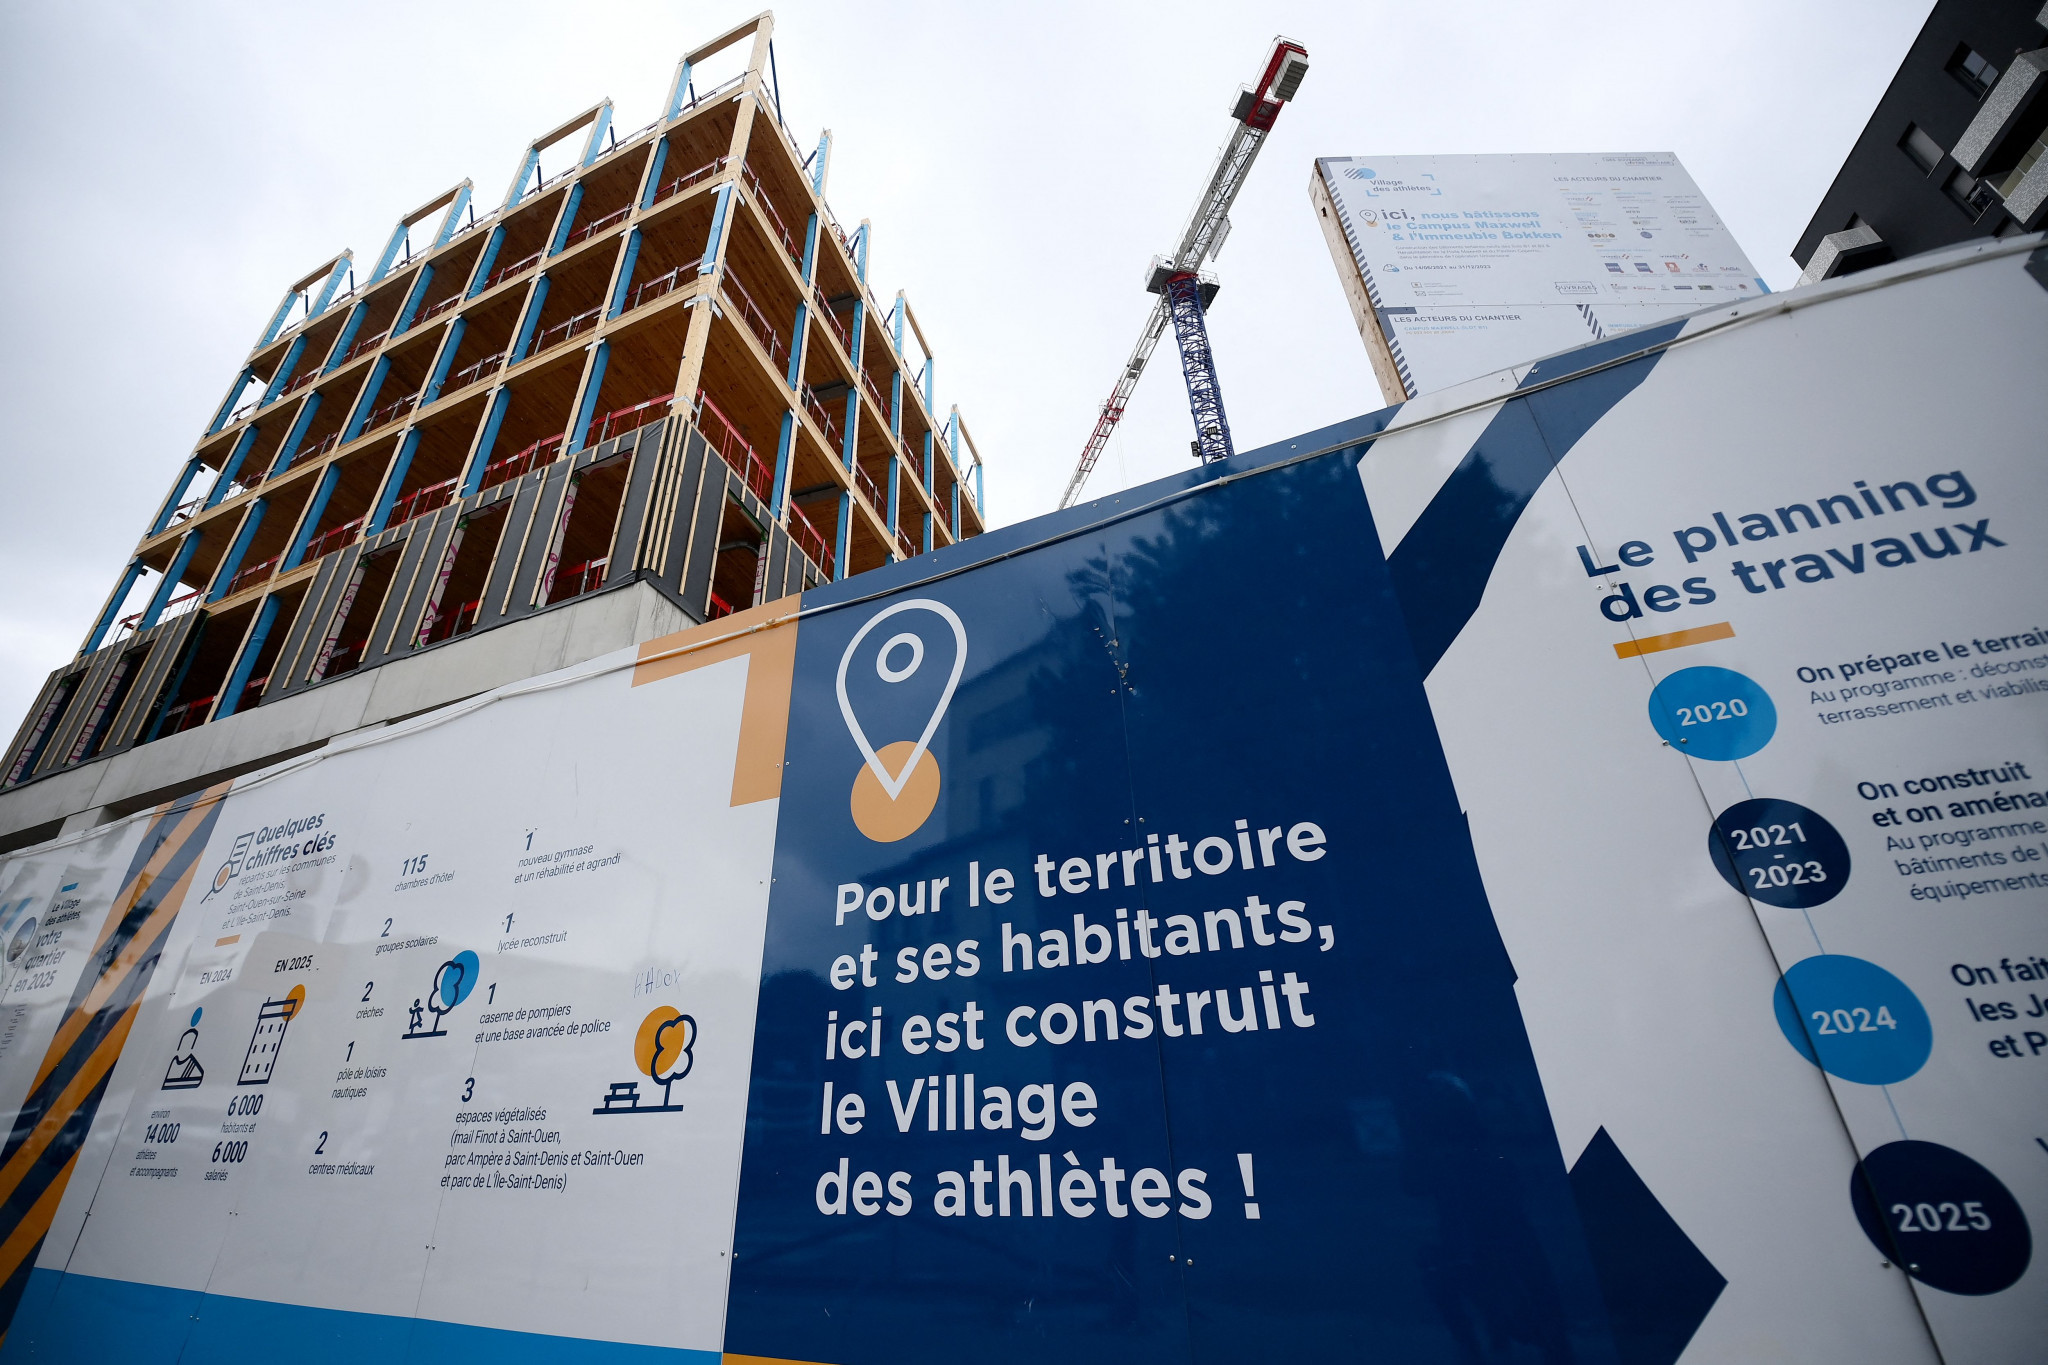 The Paris 2024 Olympic and Paralympic Village is set to be converted to housing for 6,000 residents after the Games ©Getty Images